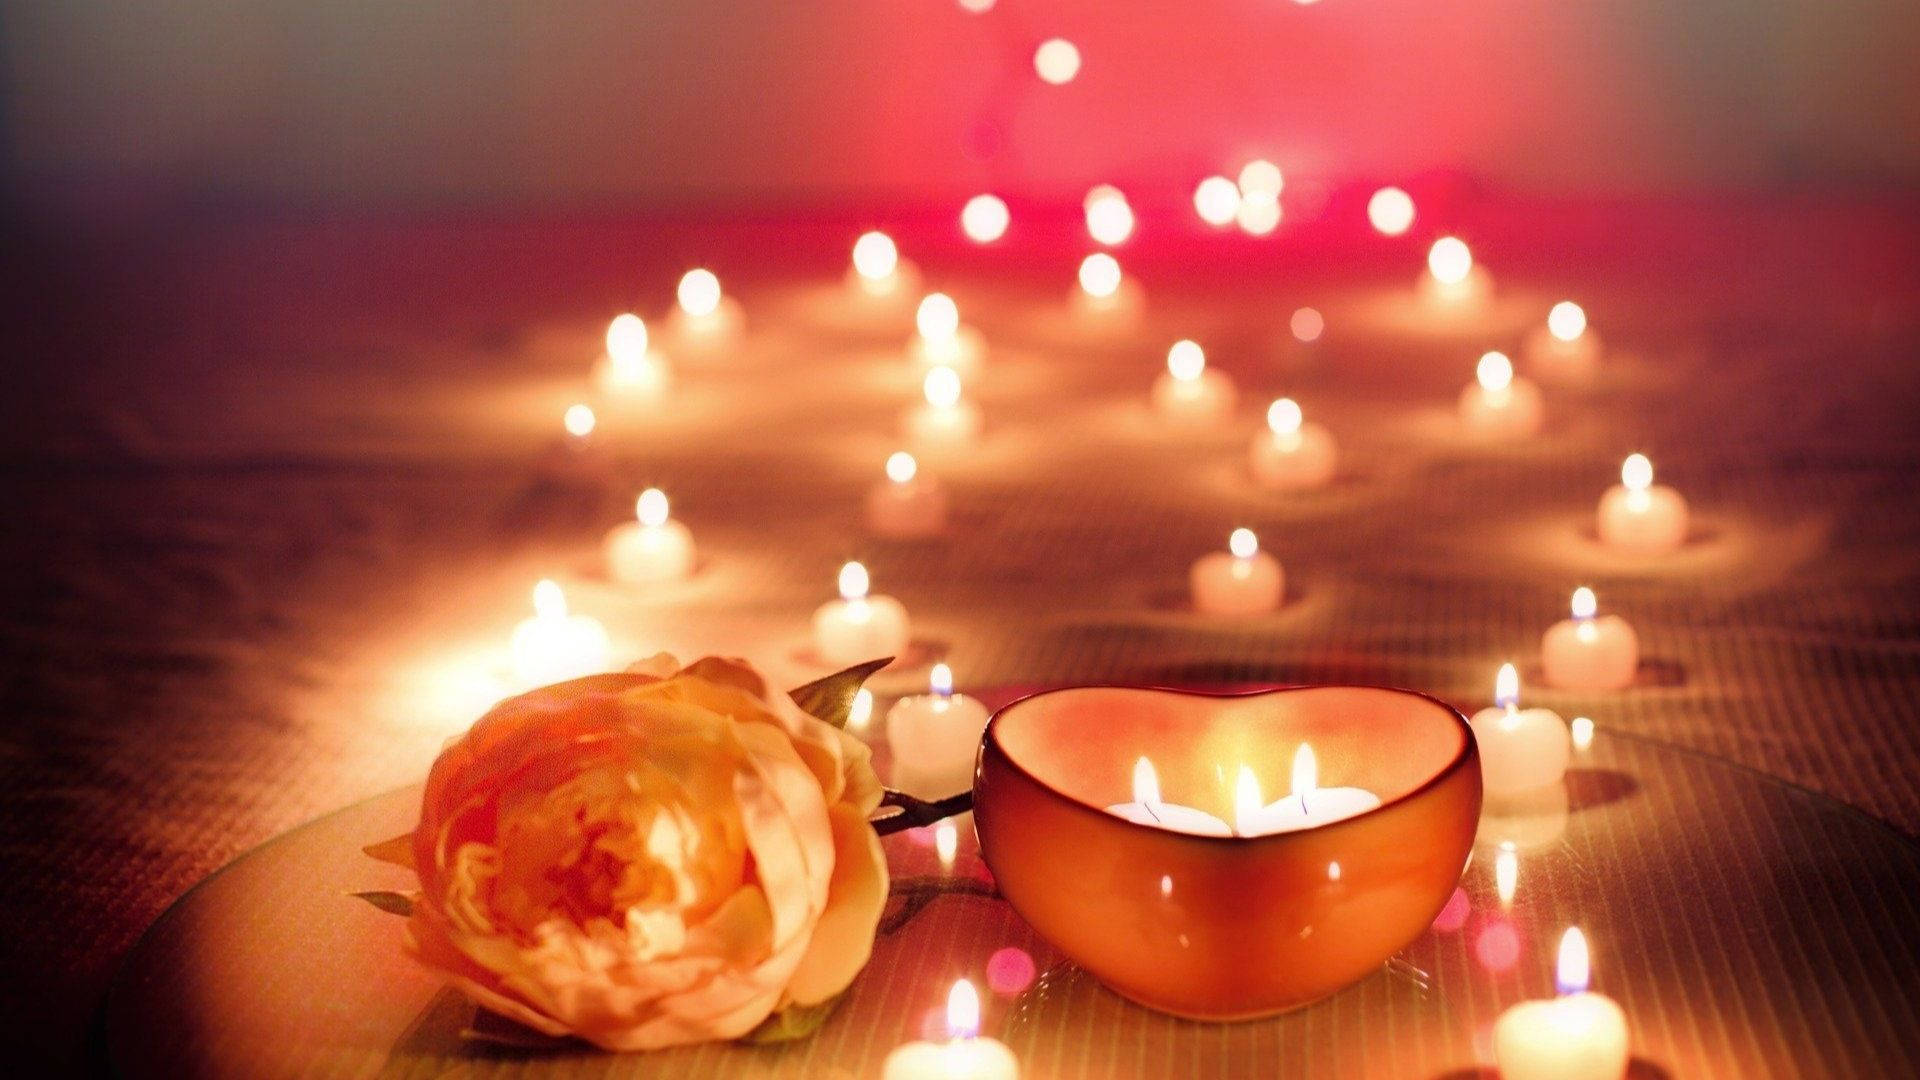 Magical Snowy Candle Decor Live Wallpaper | Cozy Winter Core - free download-mncb.edu.vn